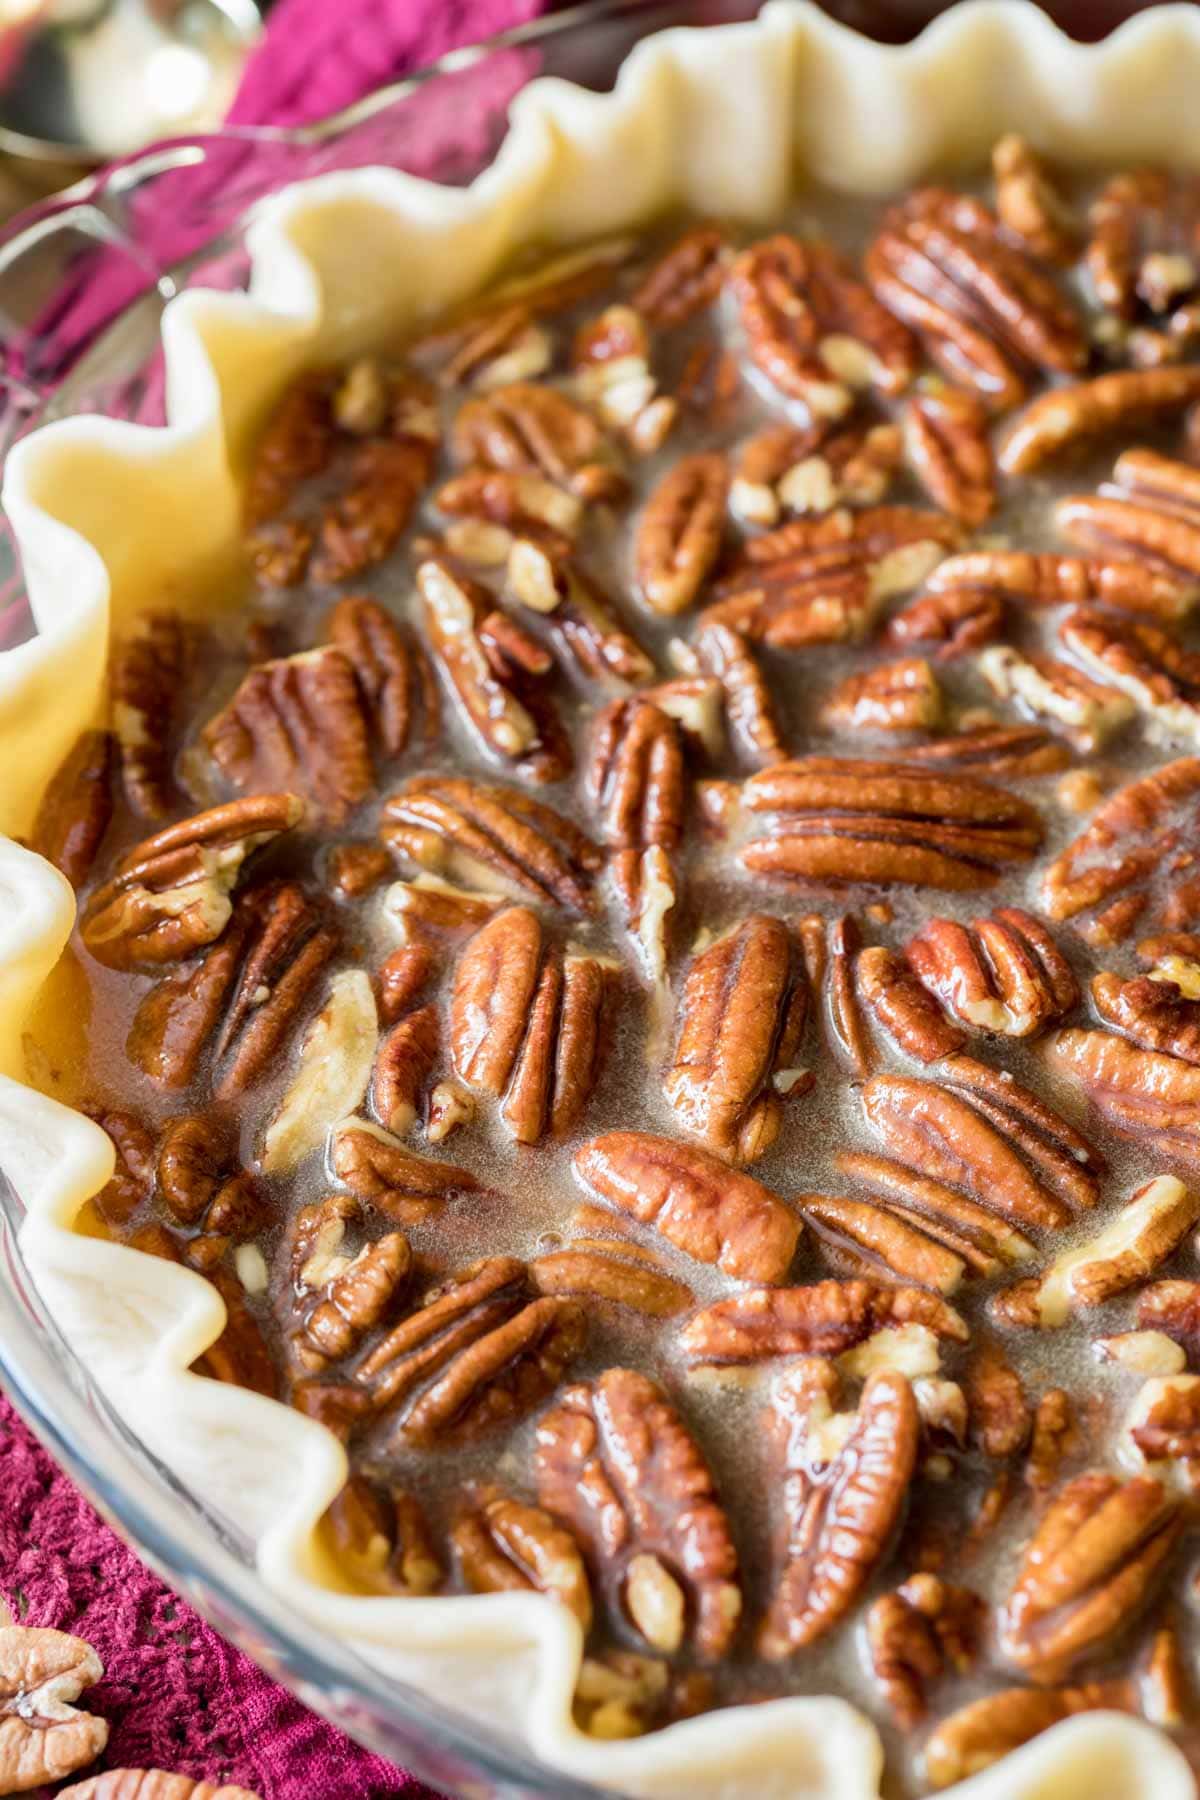 Pecans in a syrupy filling poured into a pie crust before baking.